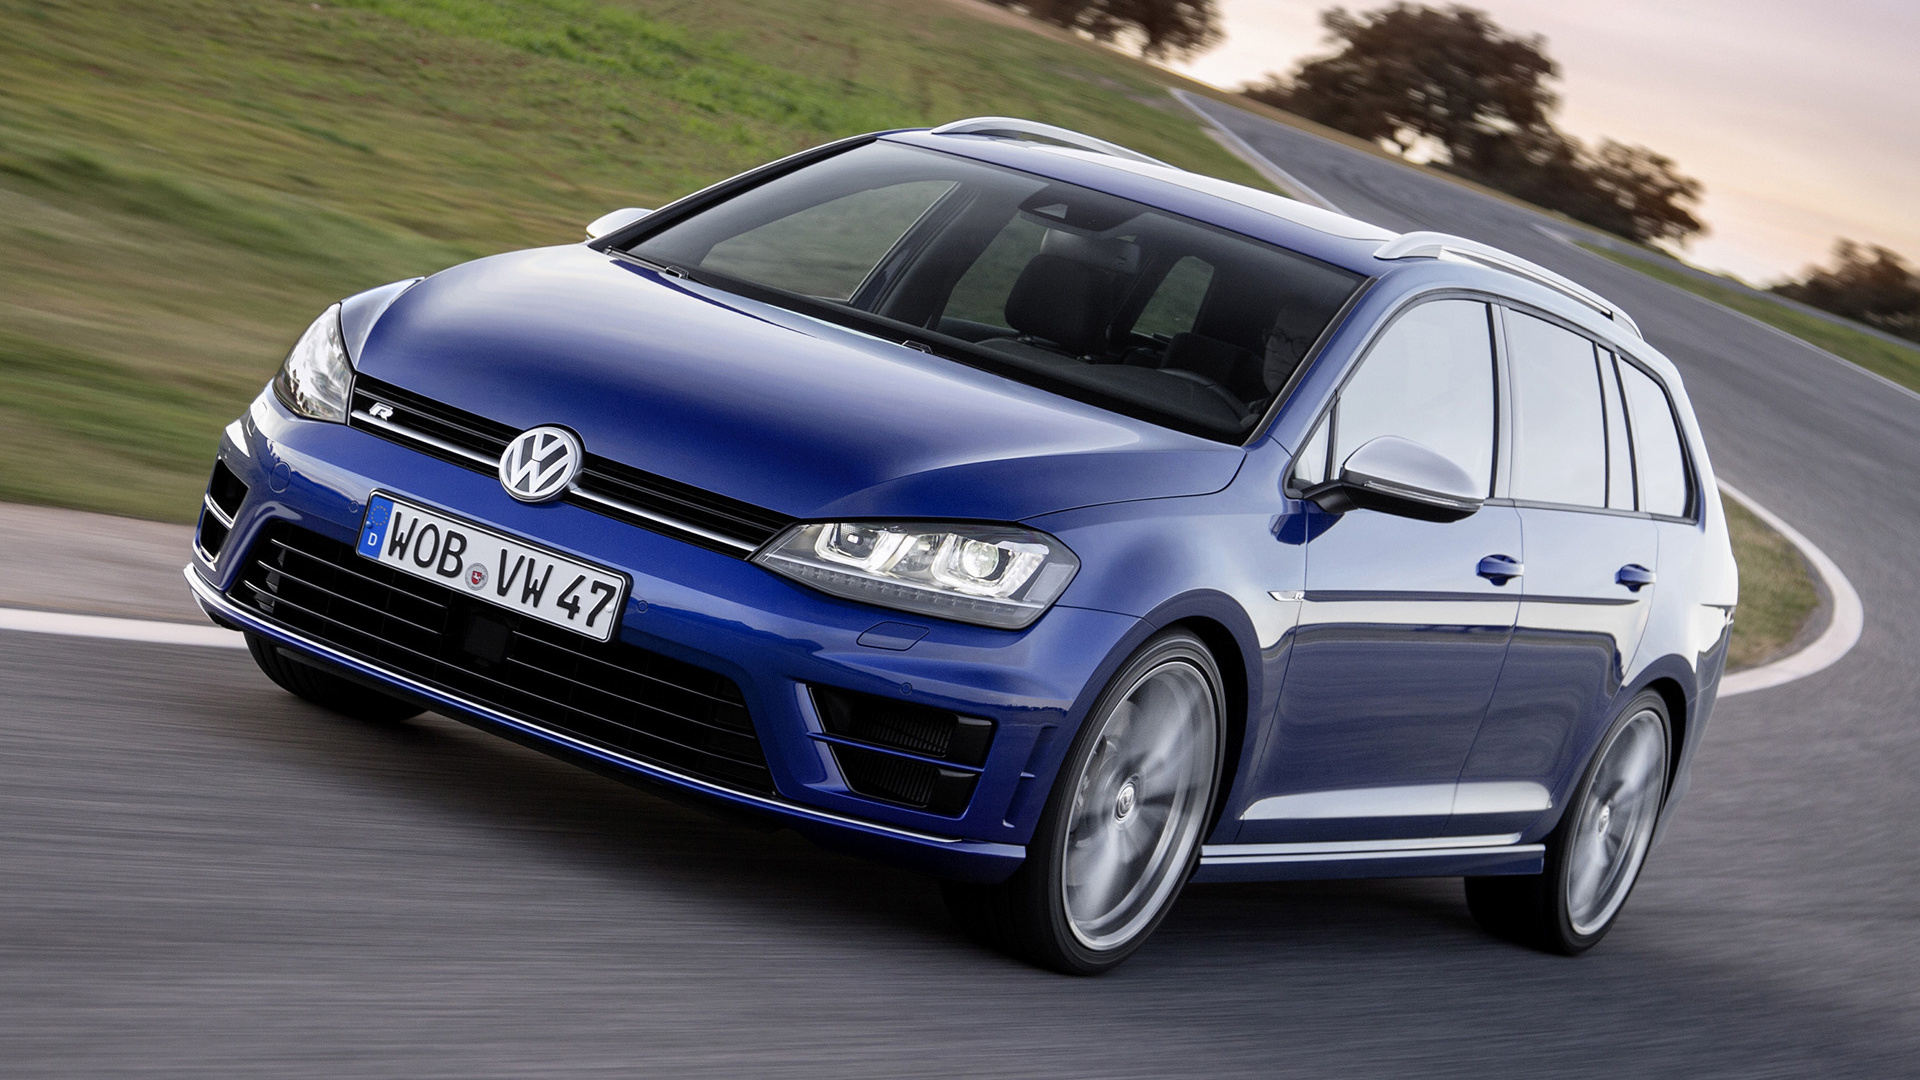 Volkswagen Golf R Variant Wallpapers and HD Images